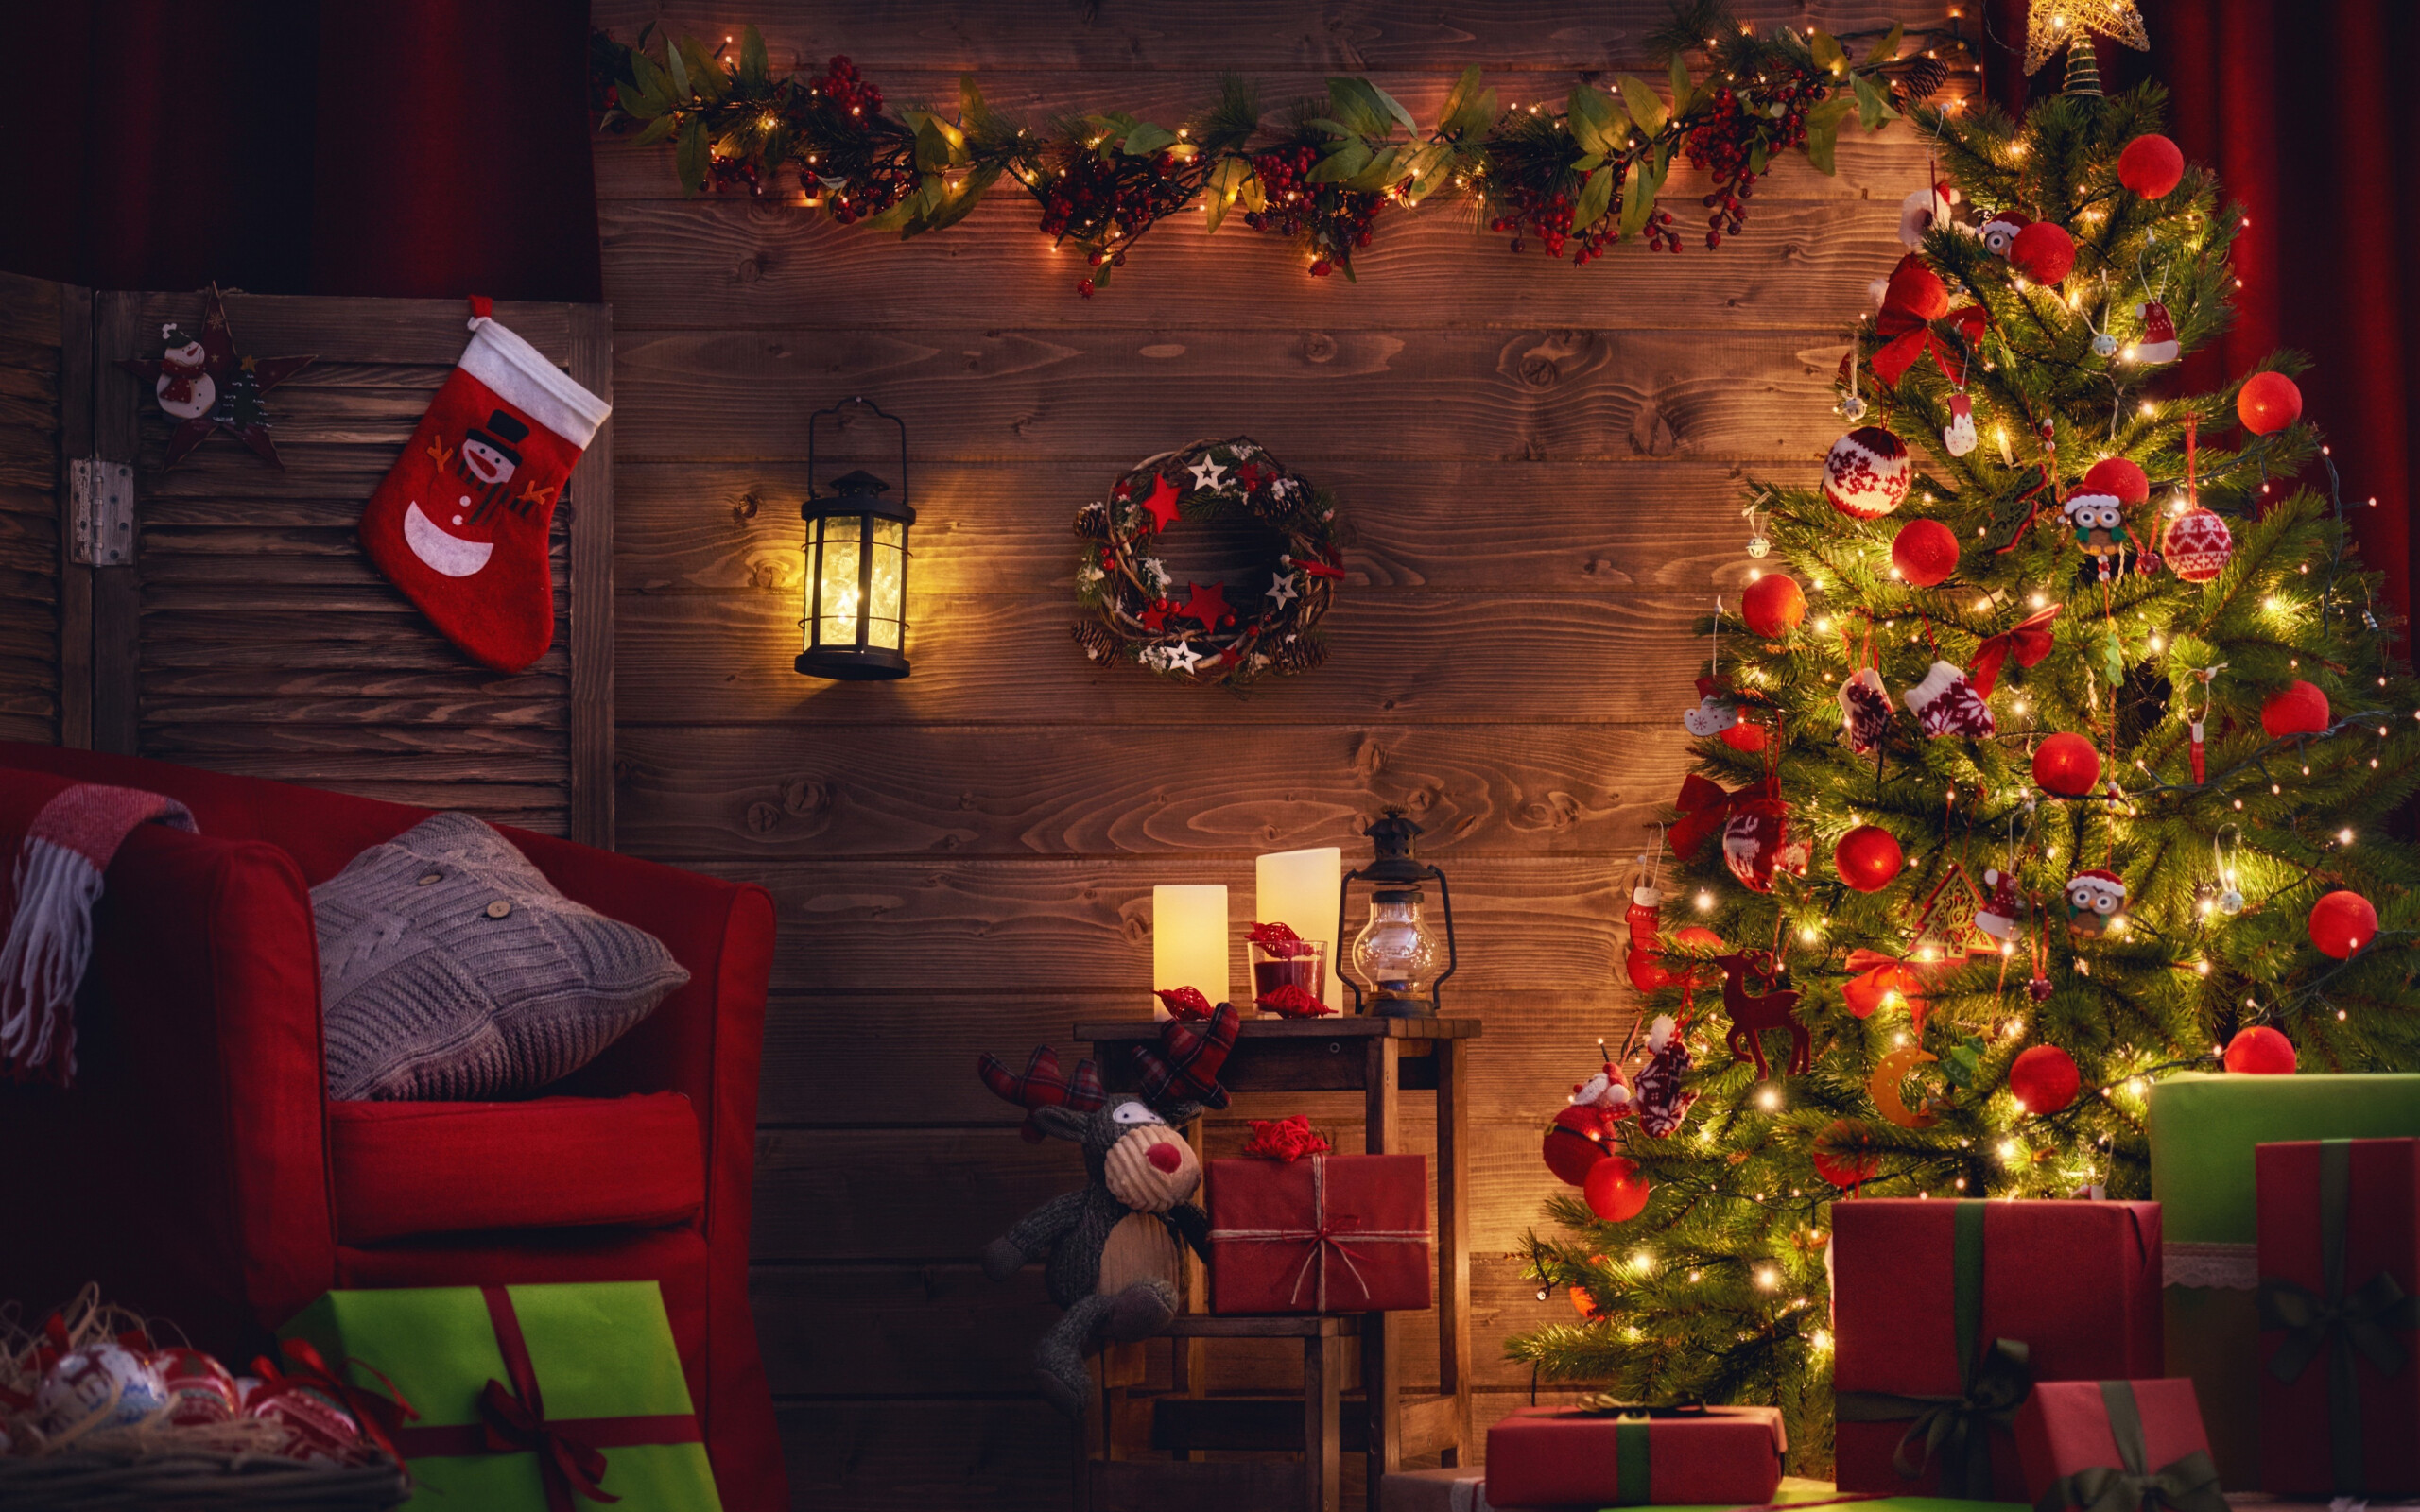 Decorations: Atmospheric Christmas tree, Holiday, Gifts, Adornments. 2560x1600 HD Wallpaper.